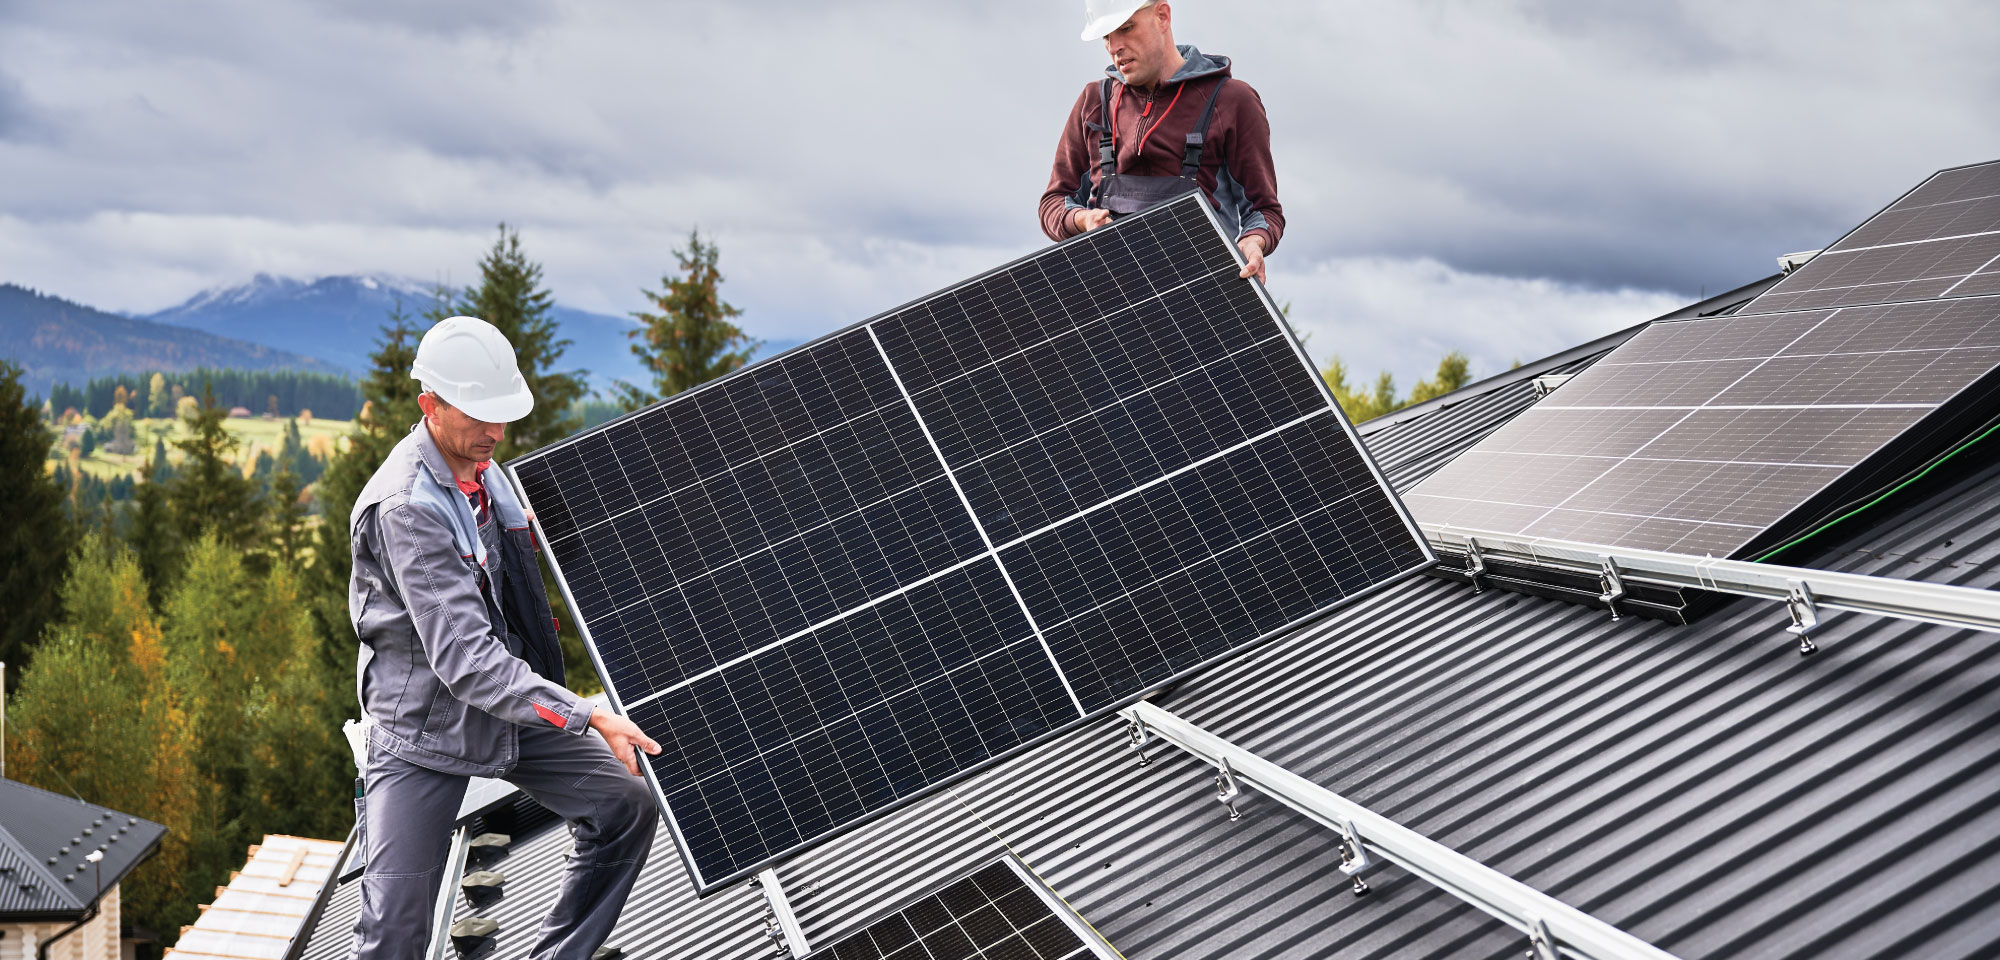 Adding solar panels to an existing system: What you need to know